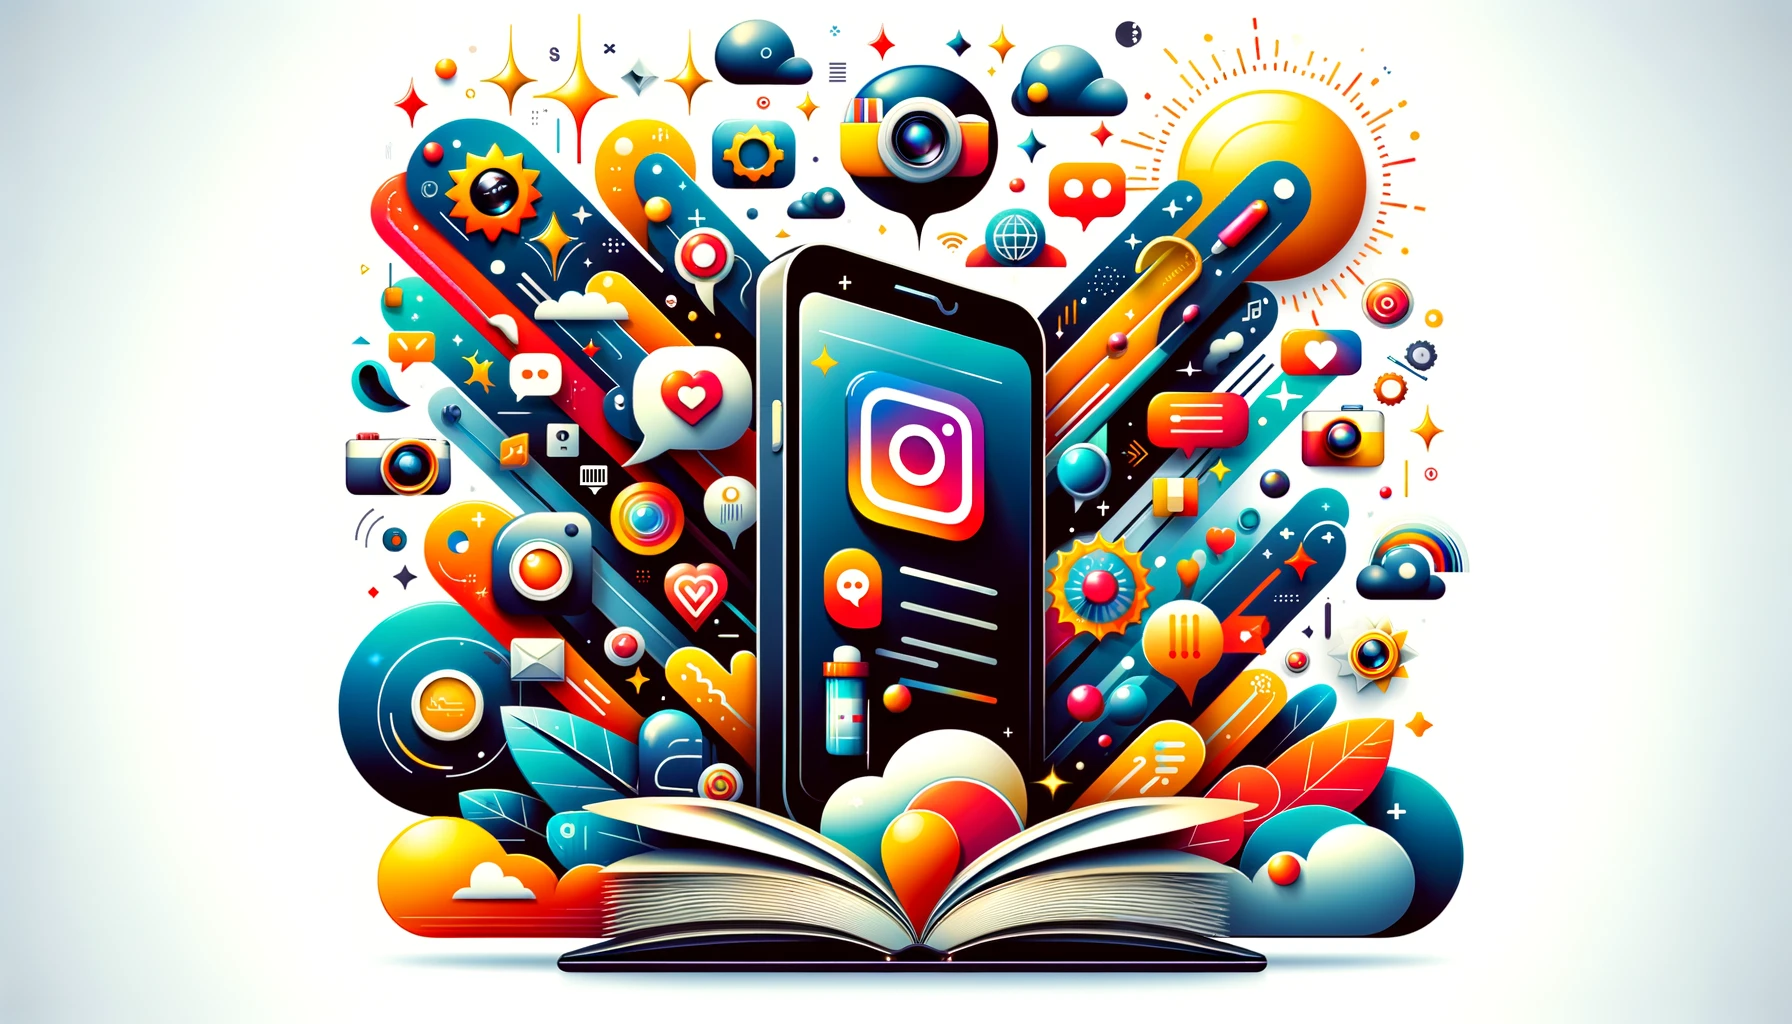 Abstract visualization of the dynamic and creative essence of Instagram Story Ads, featuring vibrant backgrounds, storytelling symbols like thought bubbles, and social interaction icons without any explicit brand logos.